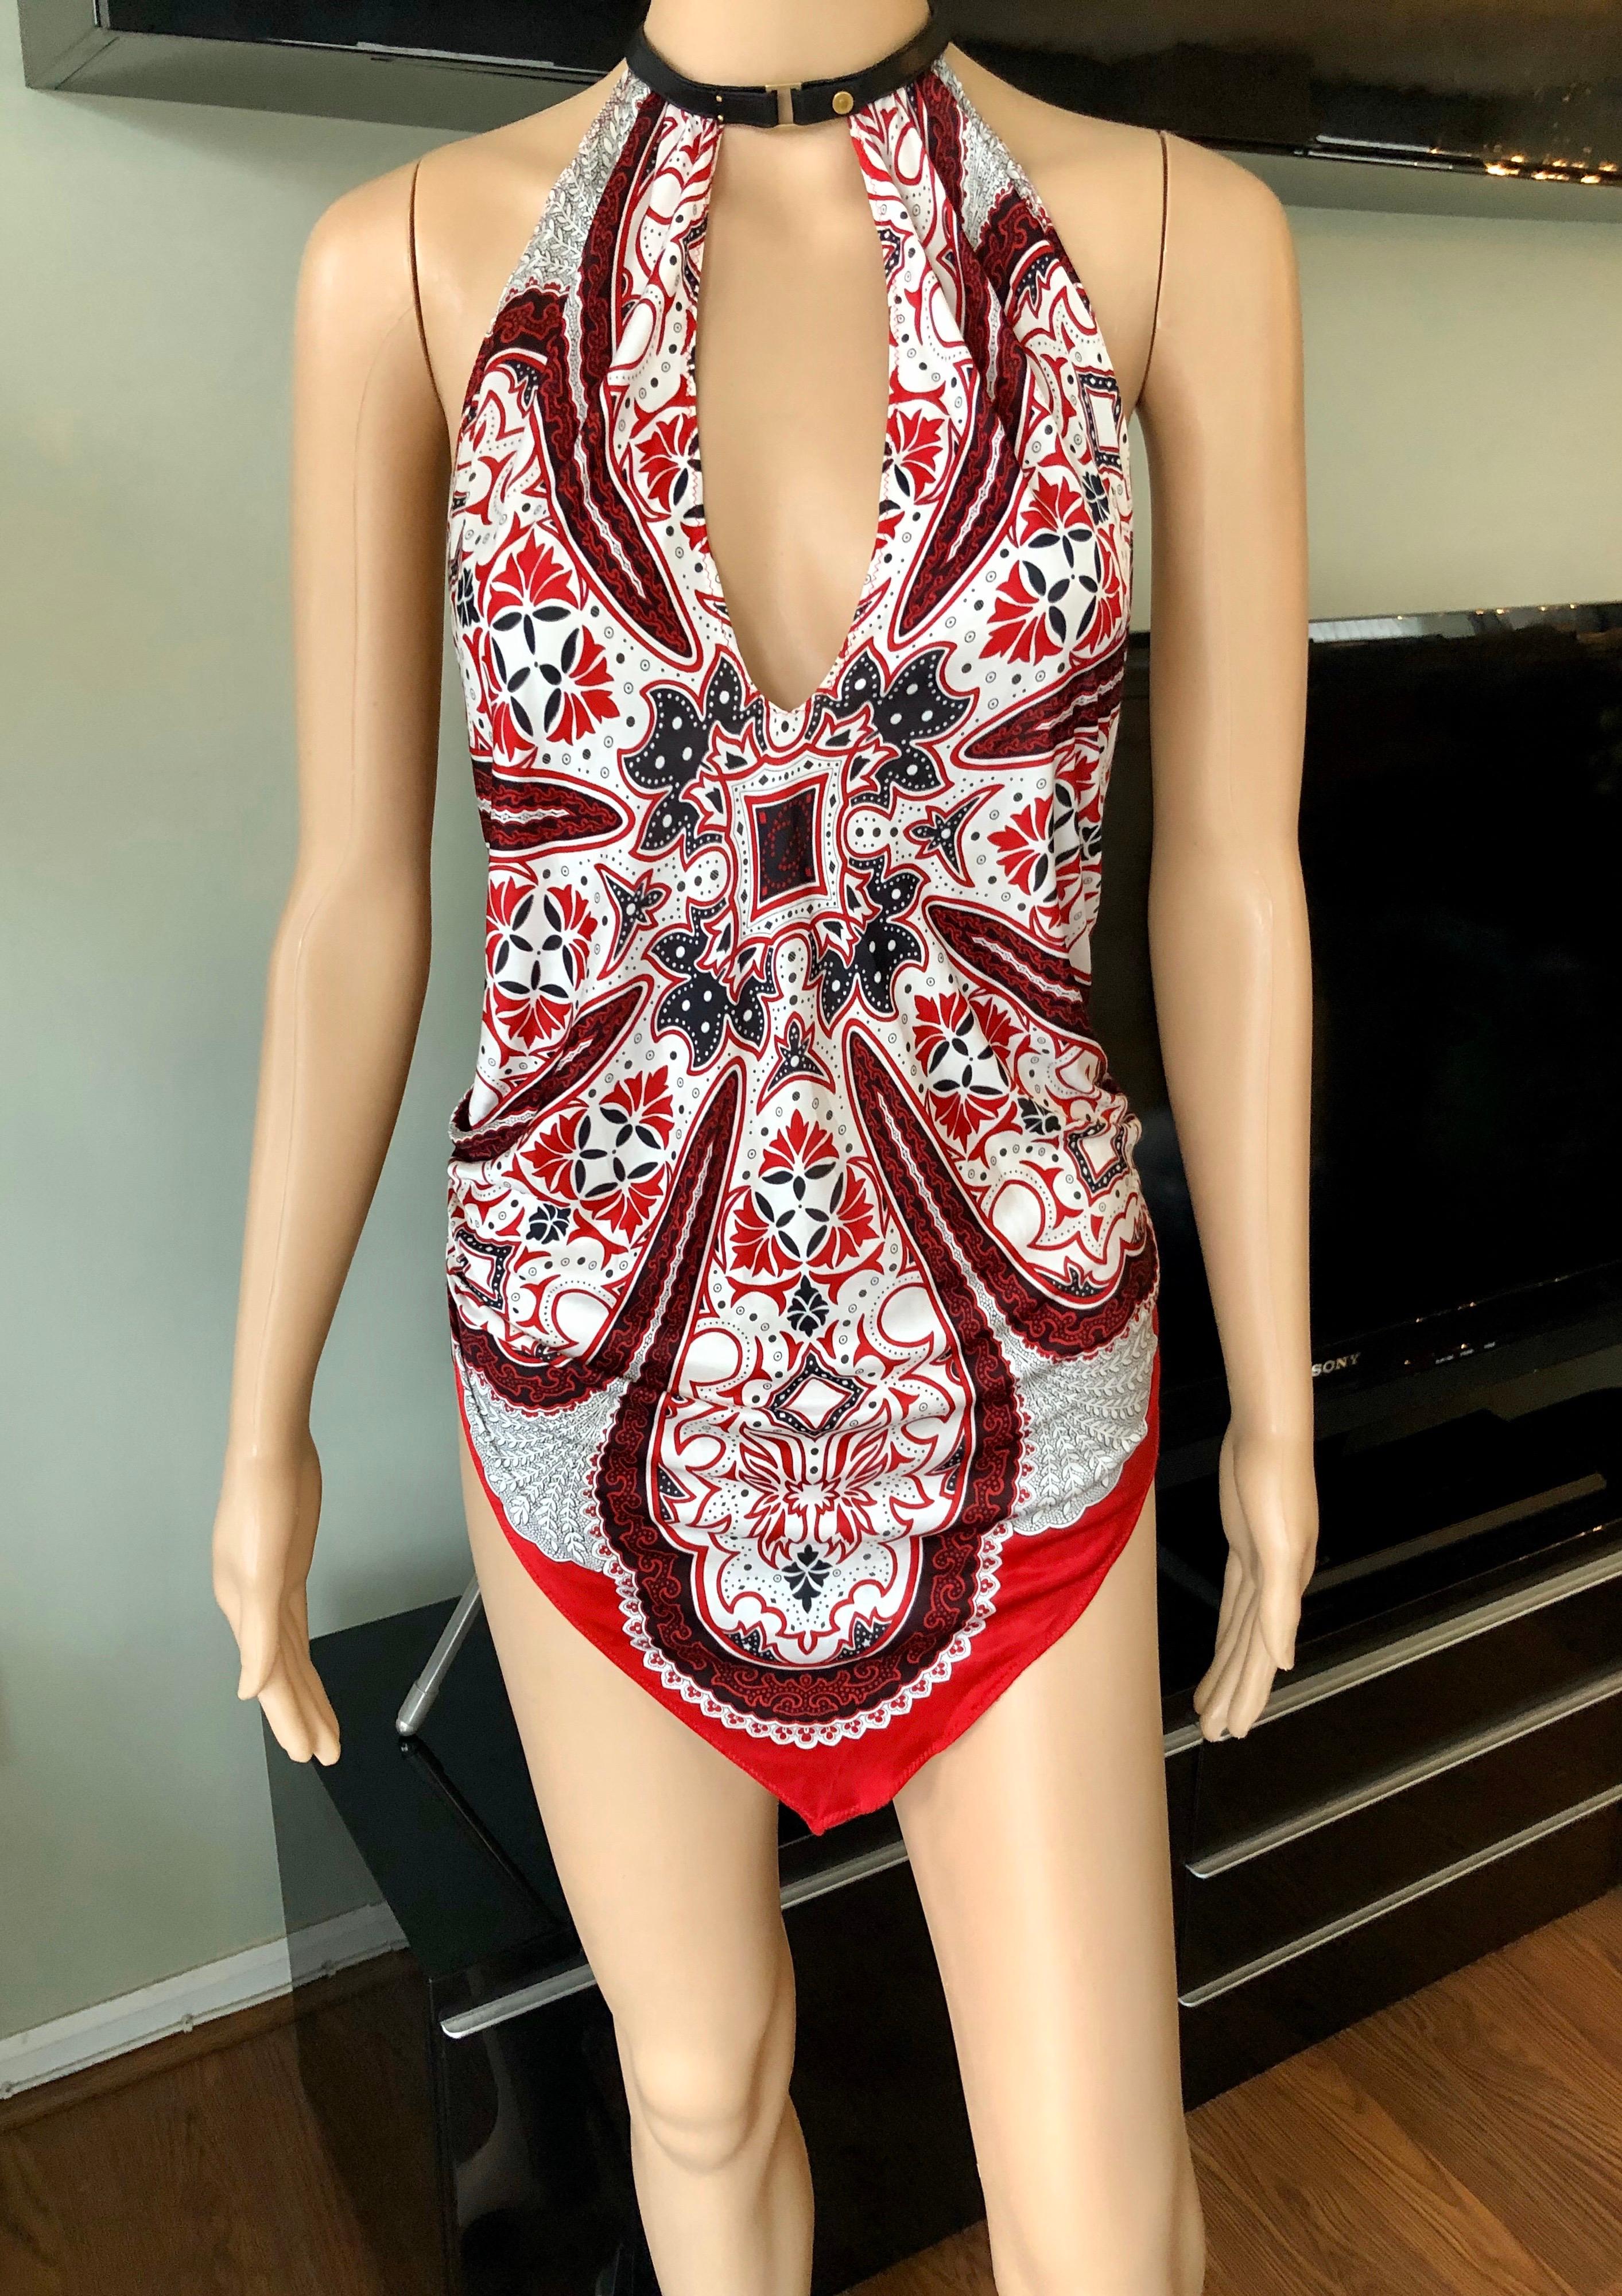 Tom Ford for Gucci Cruise 2004 Halter Leather Trim Backless Top IT 42

Gucci paisley print top featuring leather trim halterneck, open back and sash-tie closure at back.
